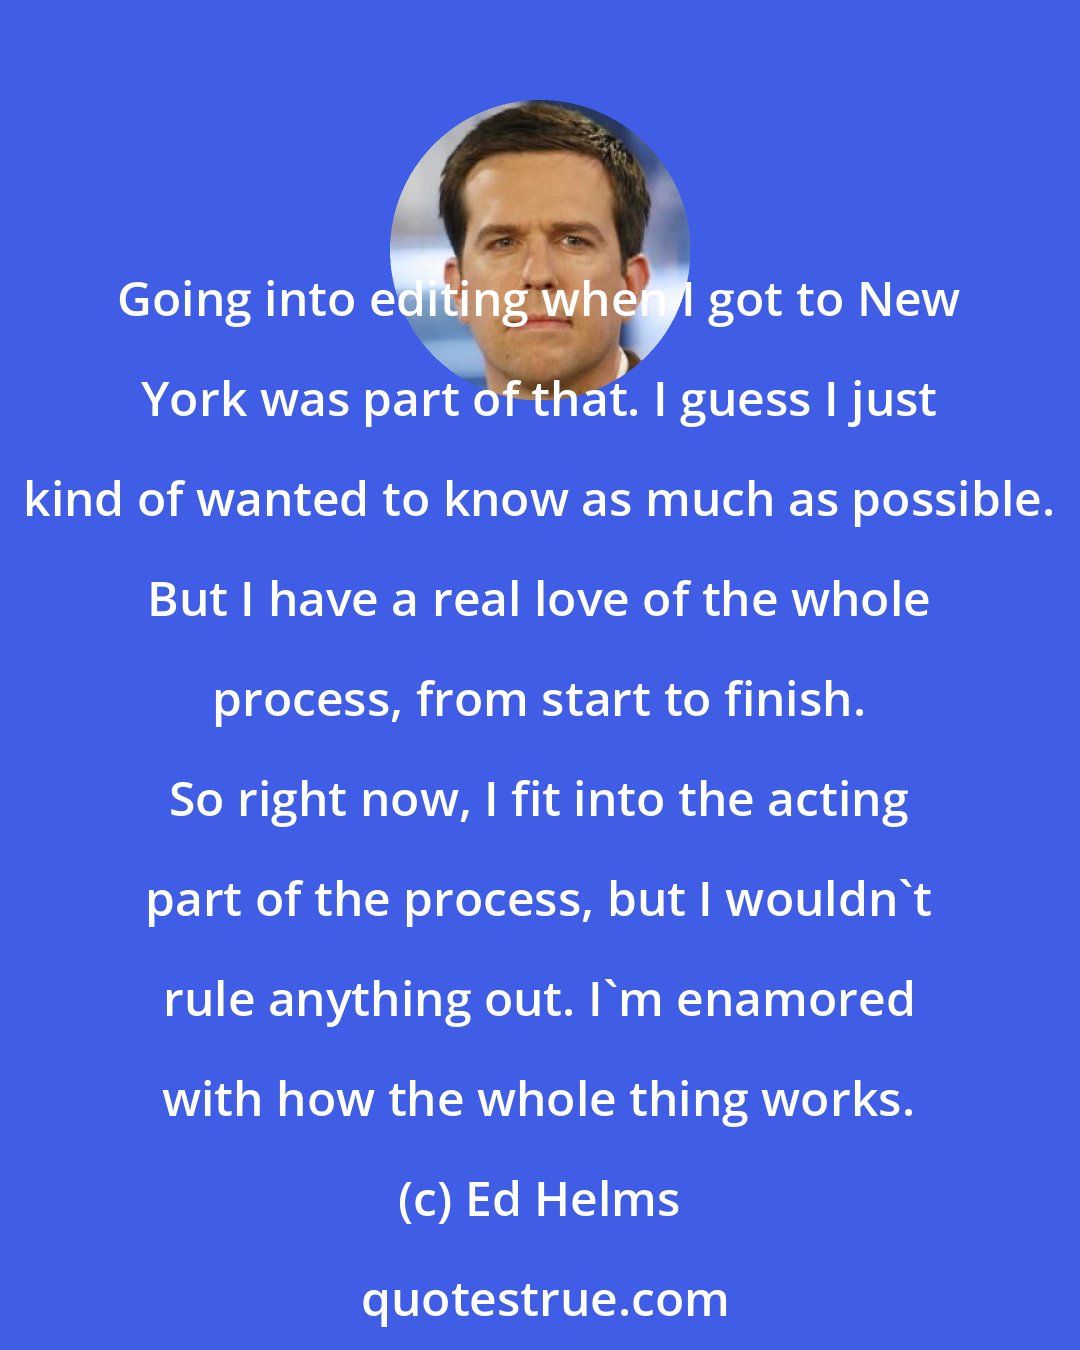 Ed Helms: Going into editing when I got to New York was part of that. I guess I just kind of wanted to know as much as possible. But I have a real love of the whole process, from start to finish. So right now, I fit into the acting part of the process, but I wouldn't rule anything out. I'm enamored with how the whole thing works.